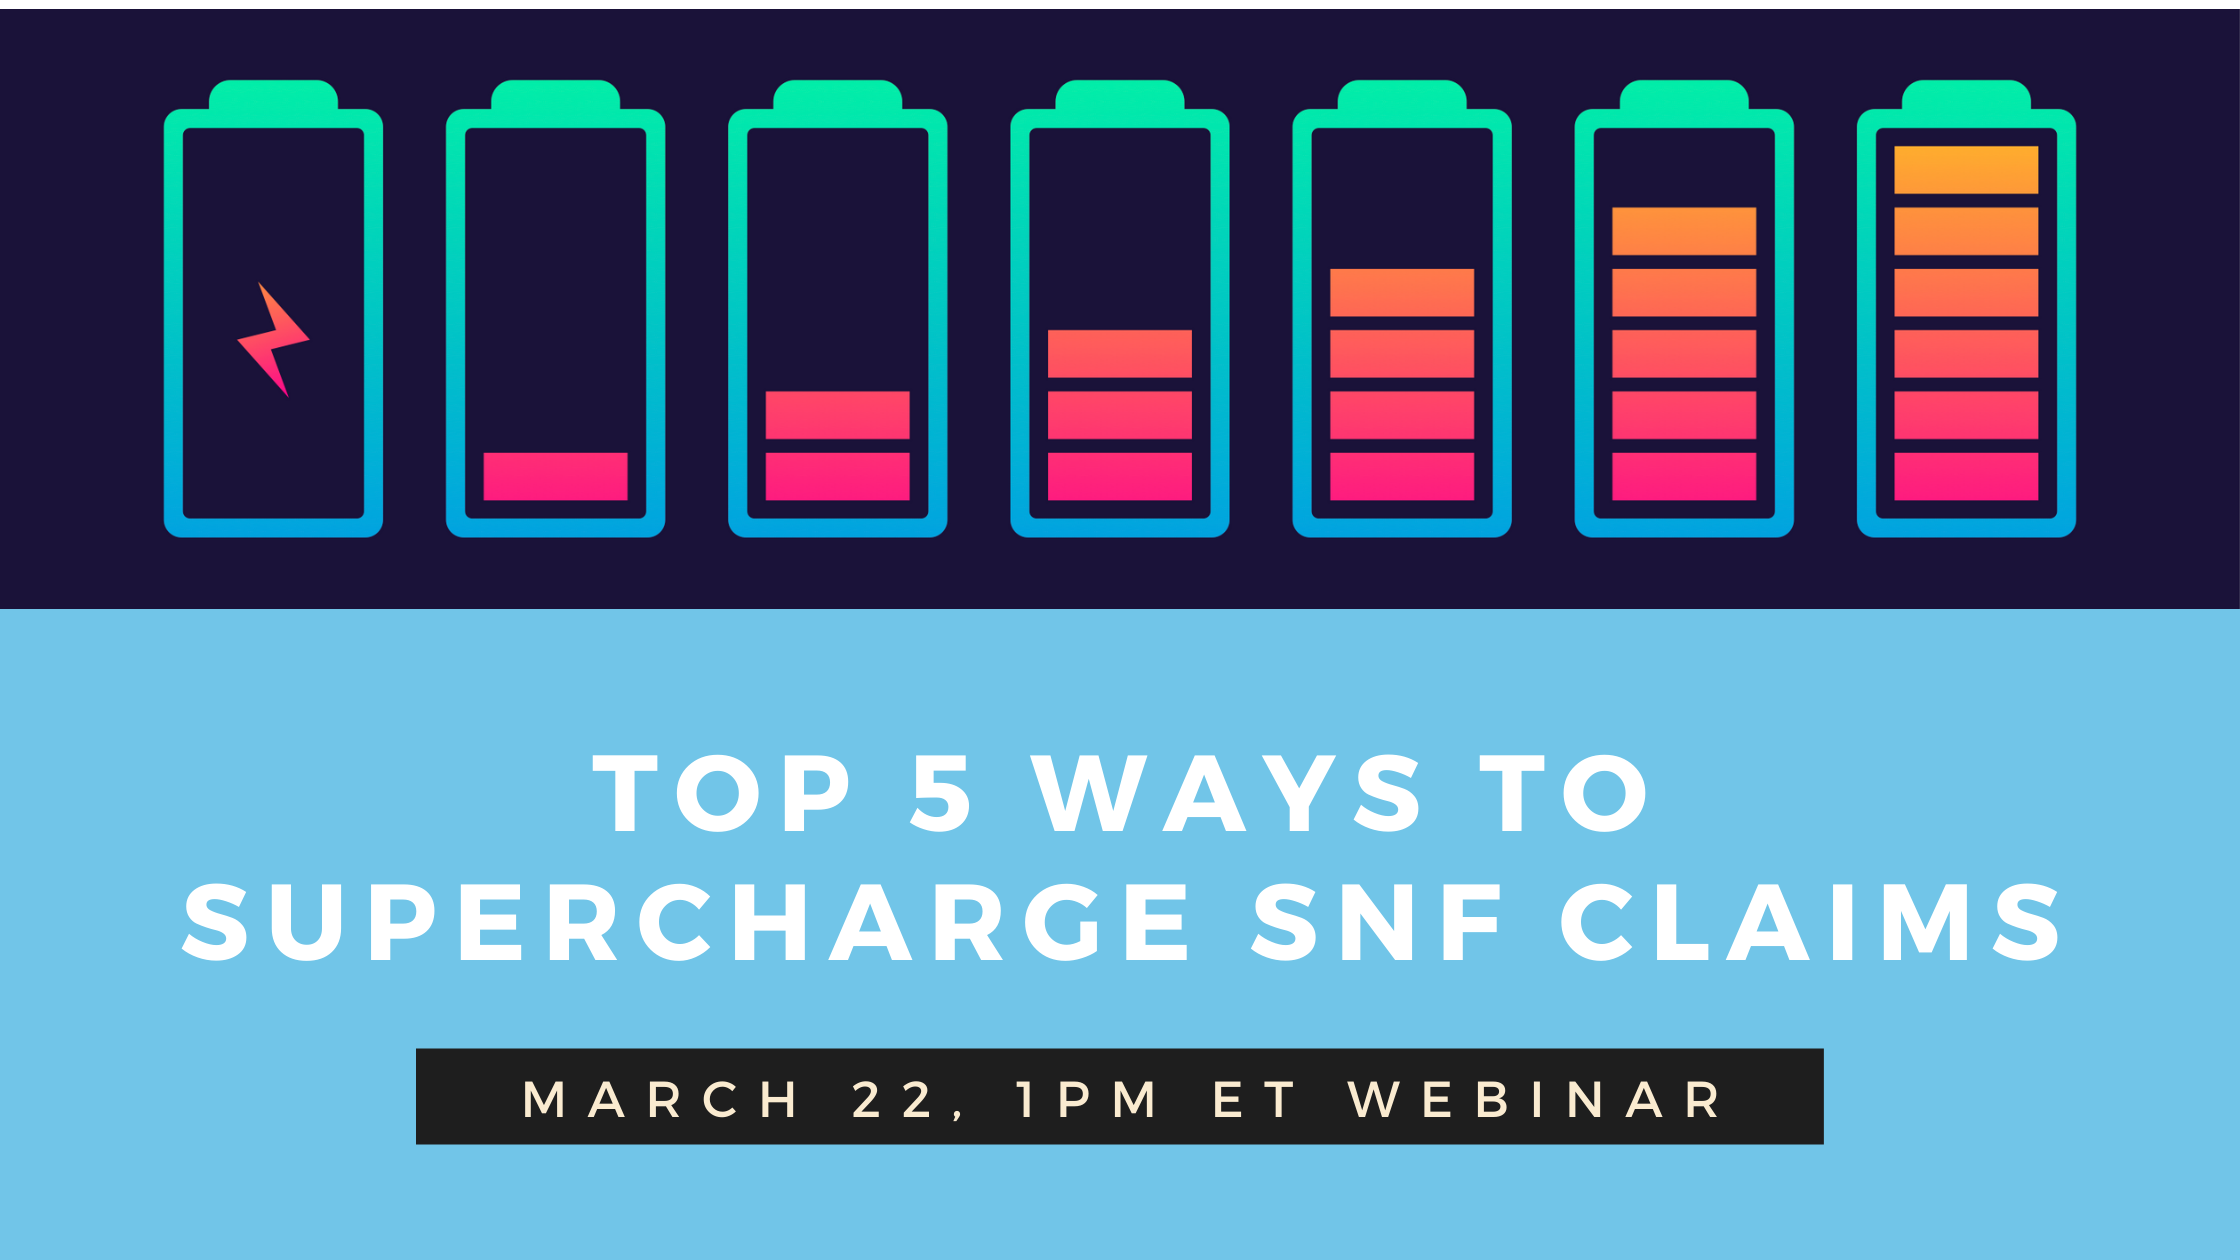 [Mar 22 Webinar] Need 5 Ways to SNF Supercharge Claims?